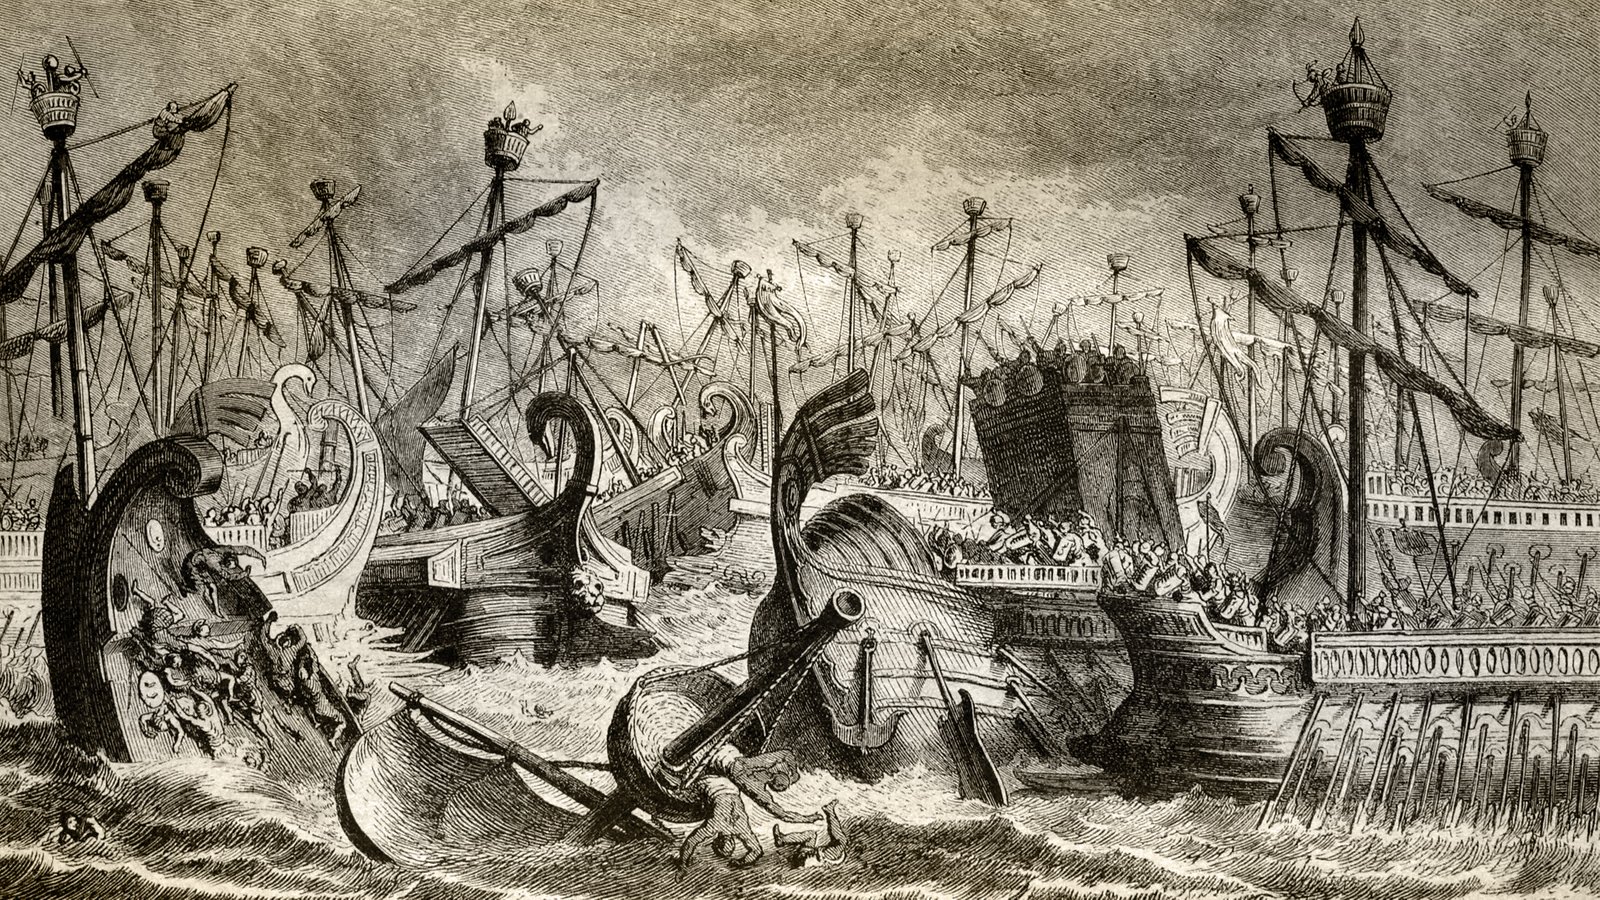 Black and white illustration of a naval battle scene with multiple ships, cannons, smoke, fire, boats, and people in the ocean representing Roman victory over the Carthaginian fleet at the Battle of the Aegates Islands.